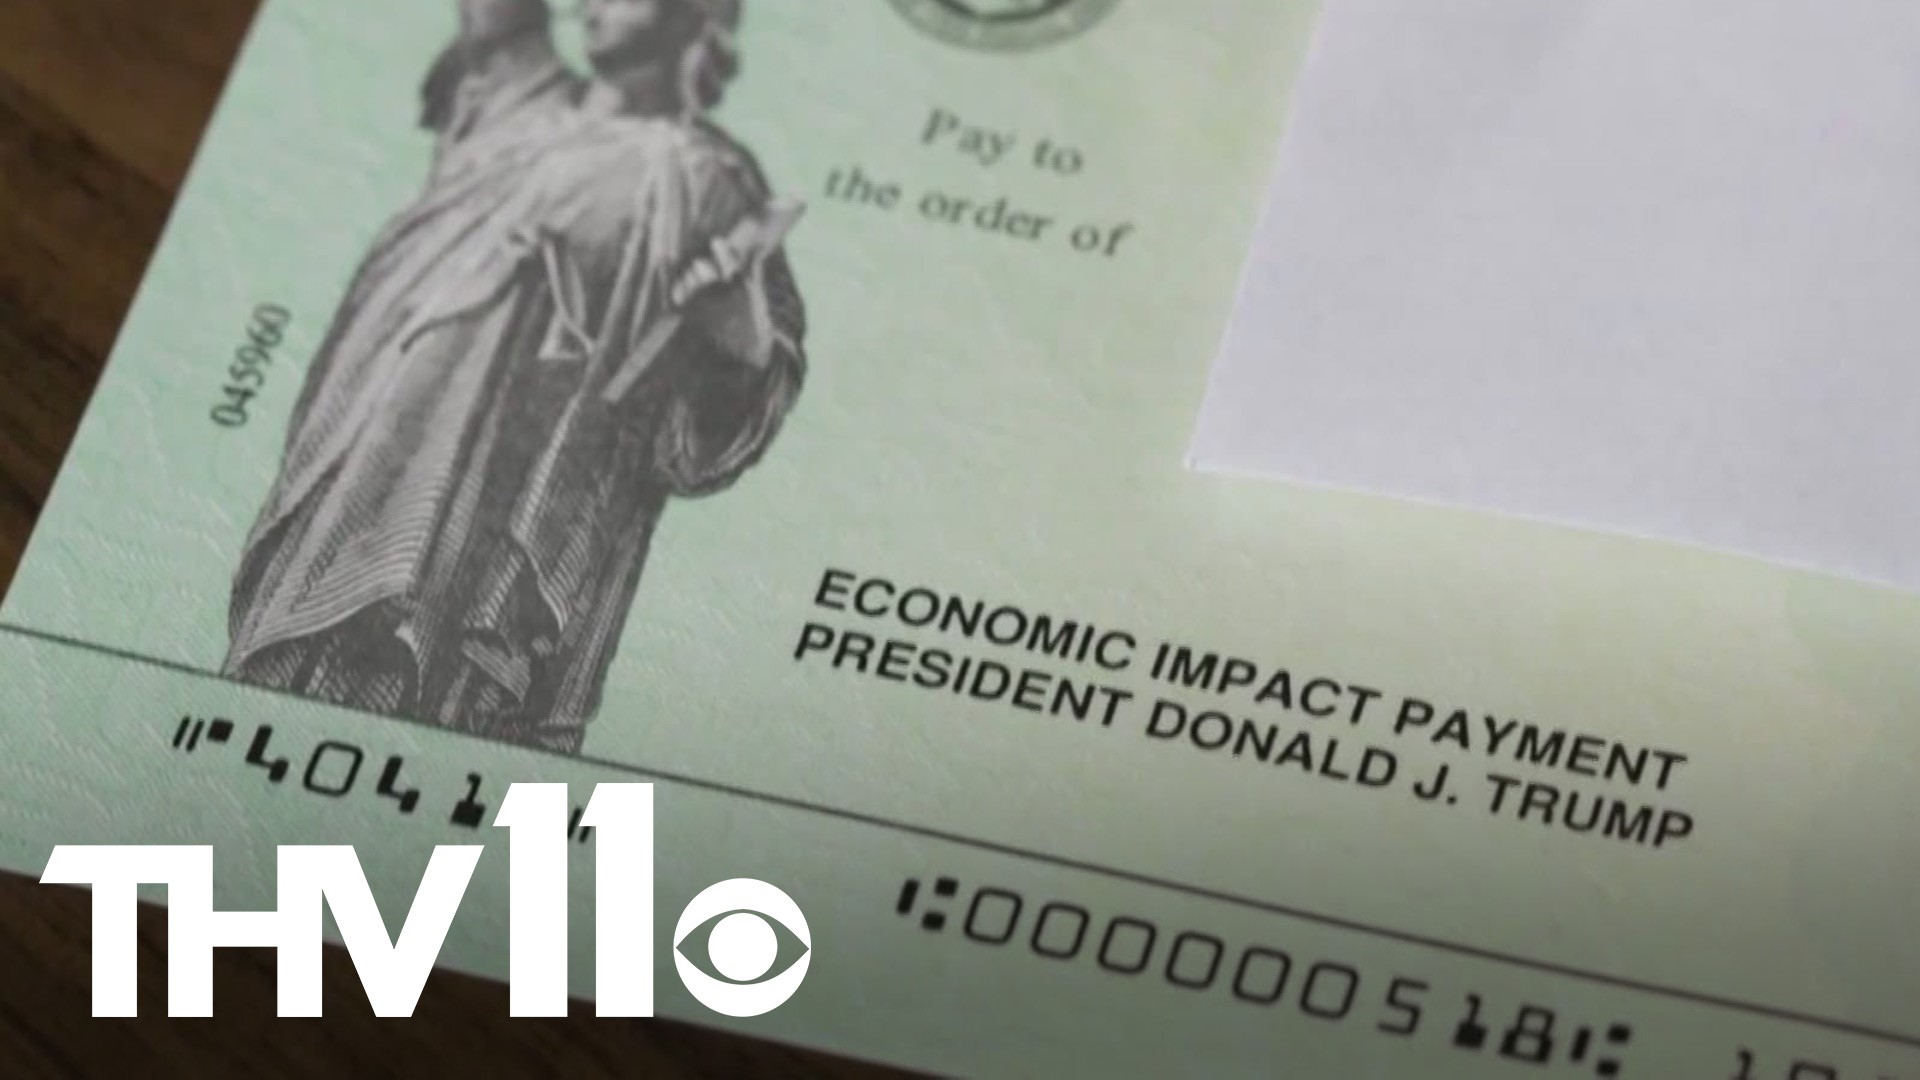 The tax paperwork won't be difficult to report your missing stimulus check. A new line is on all the major IRS forms like the 1040 and the 1040-S.